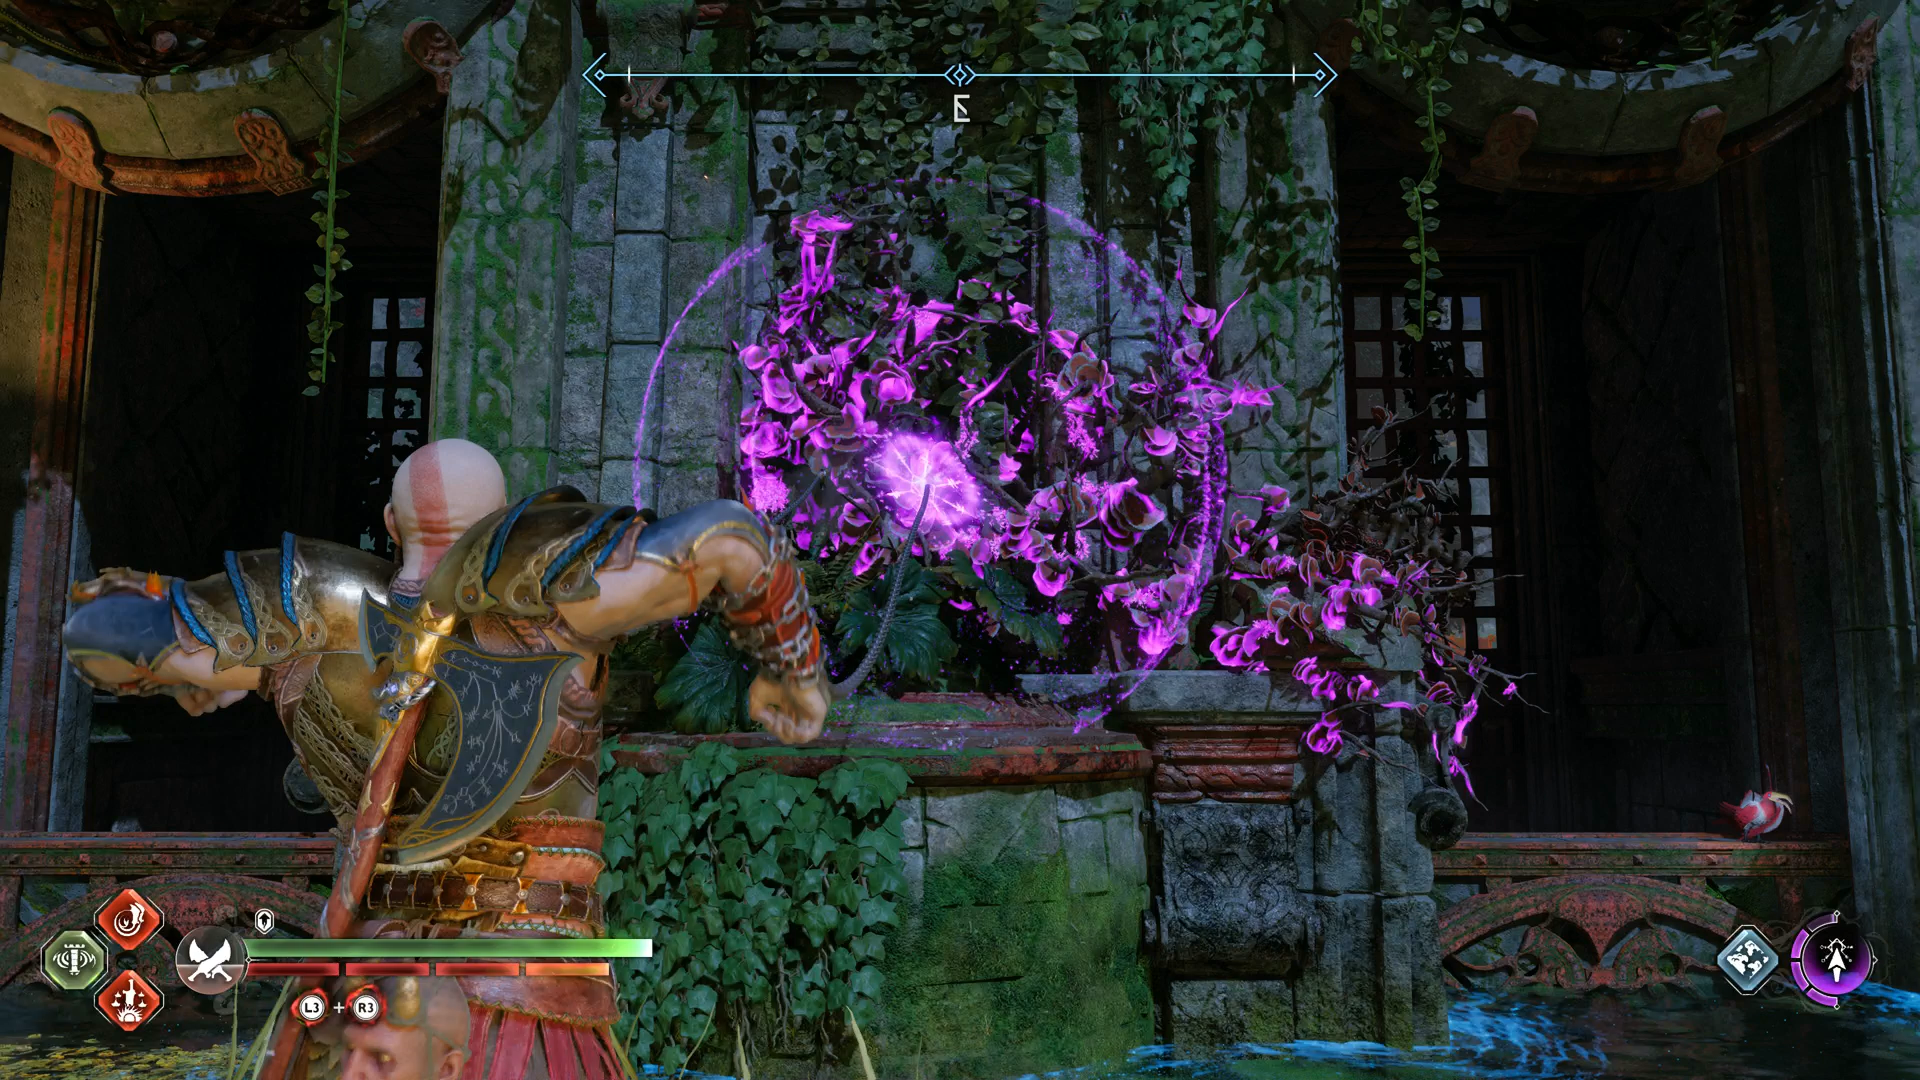 Kratos lighting some magic vines with his Blades of Chaos in God of War Ragnarok